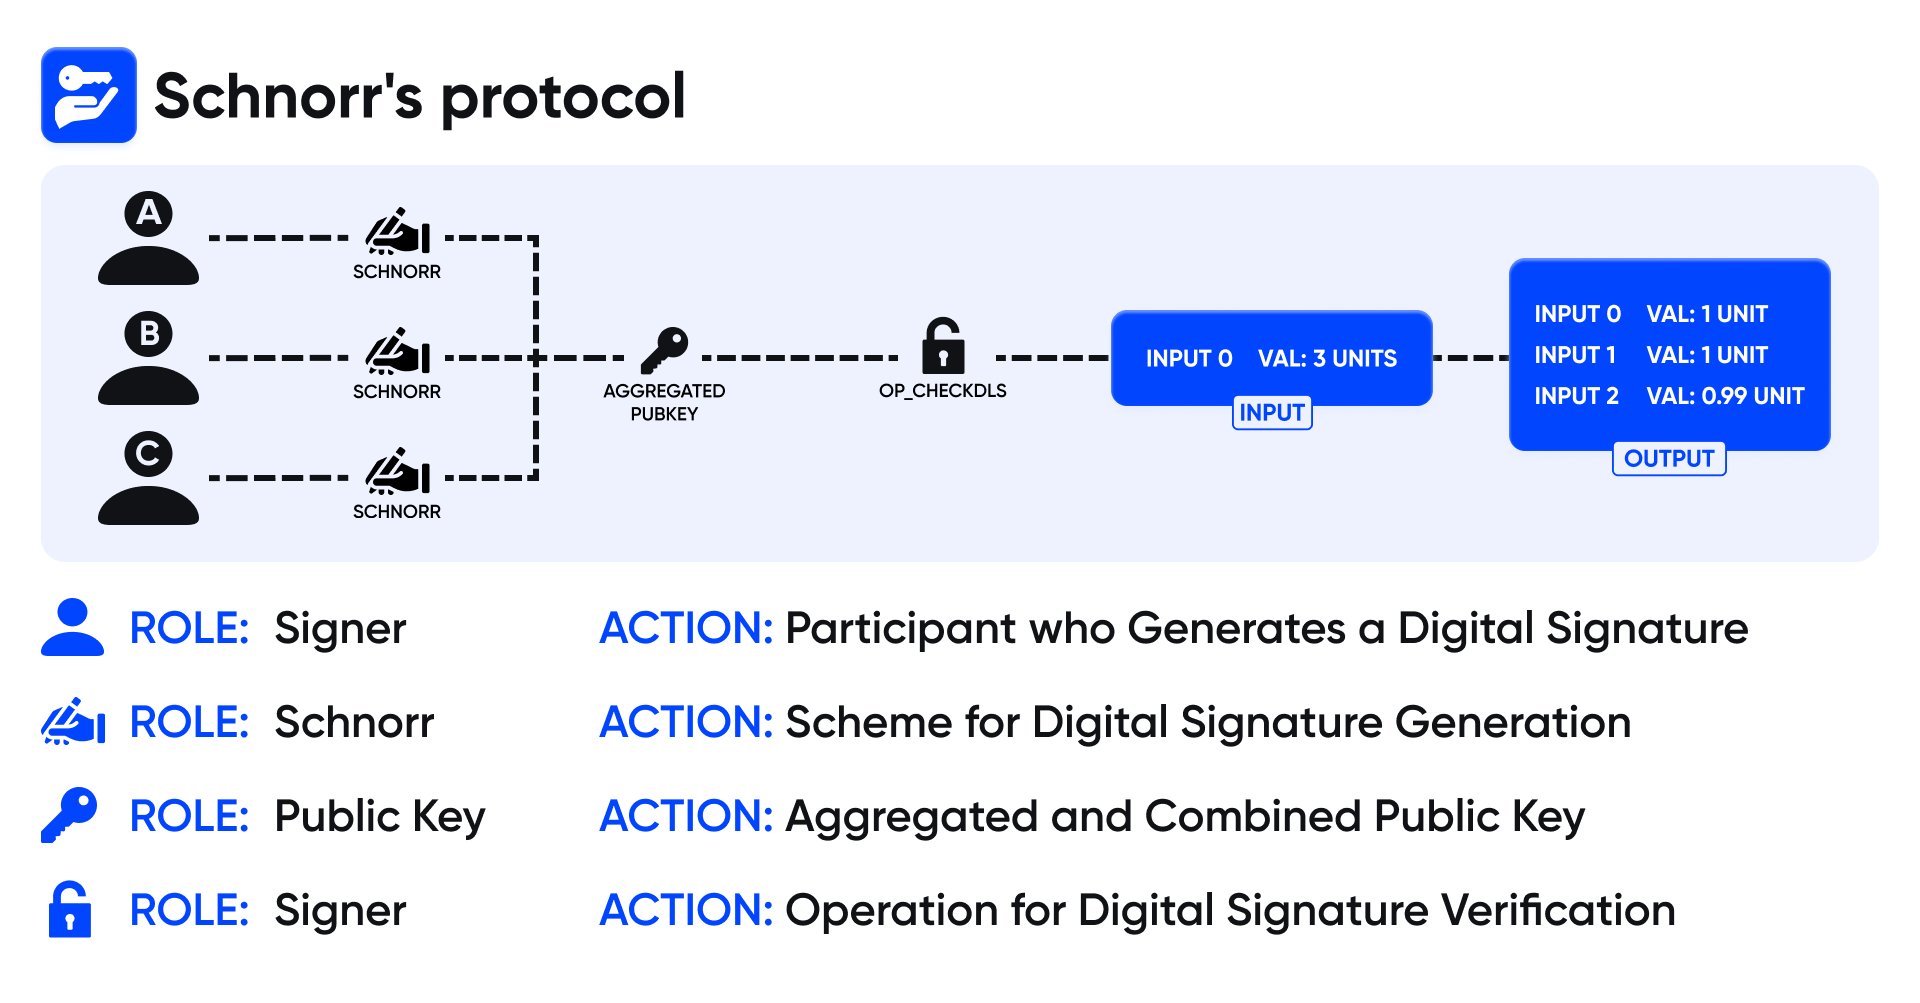 Detailed Schematic Overview of Schnorr's Protocol (Example)